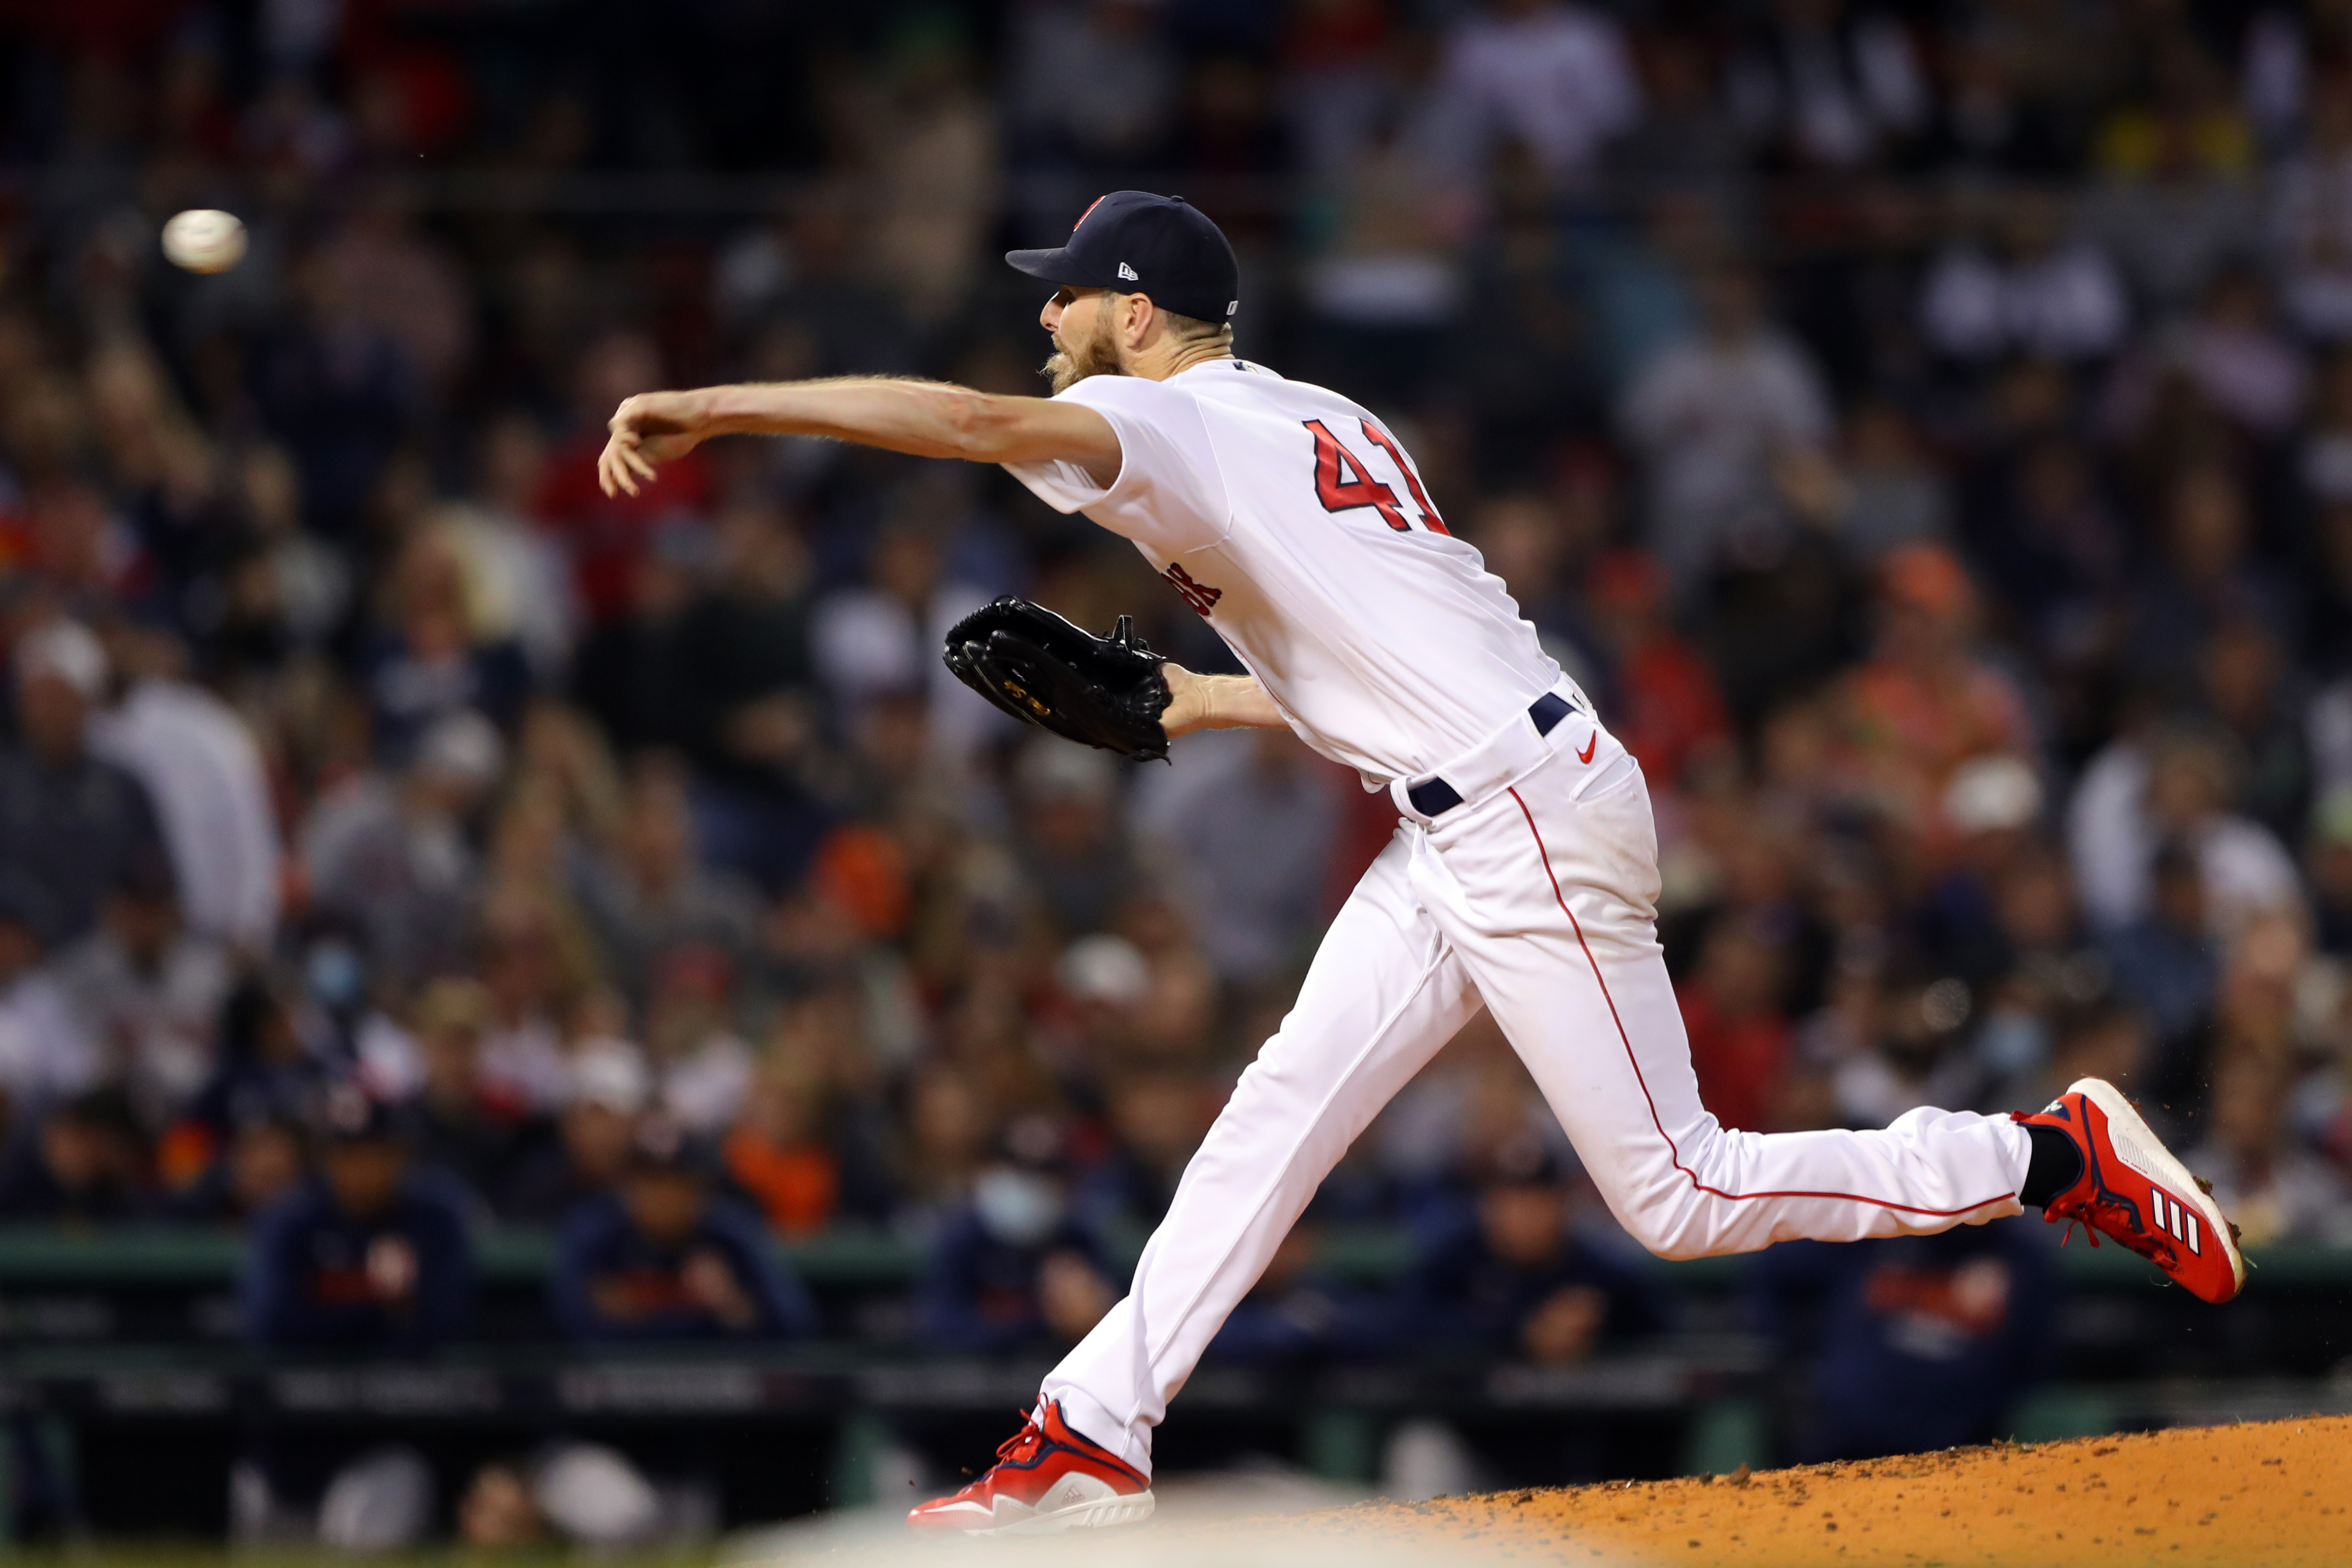 Red Sox lefty Chris Sale dealing with setback after rib fracture